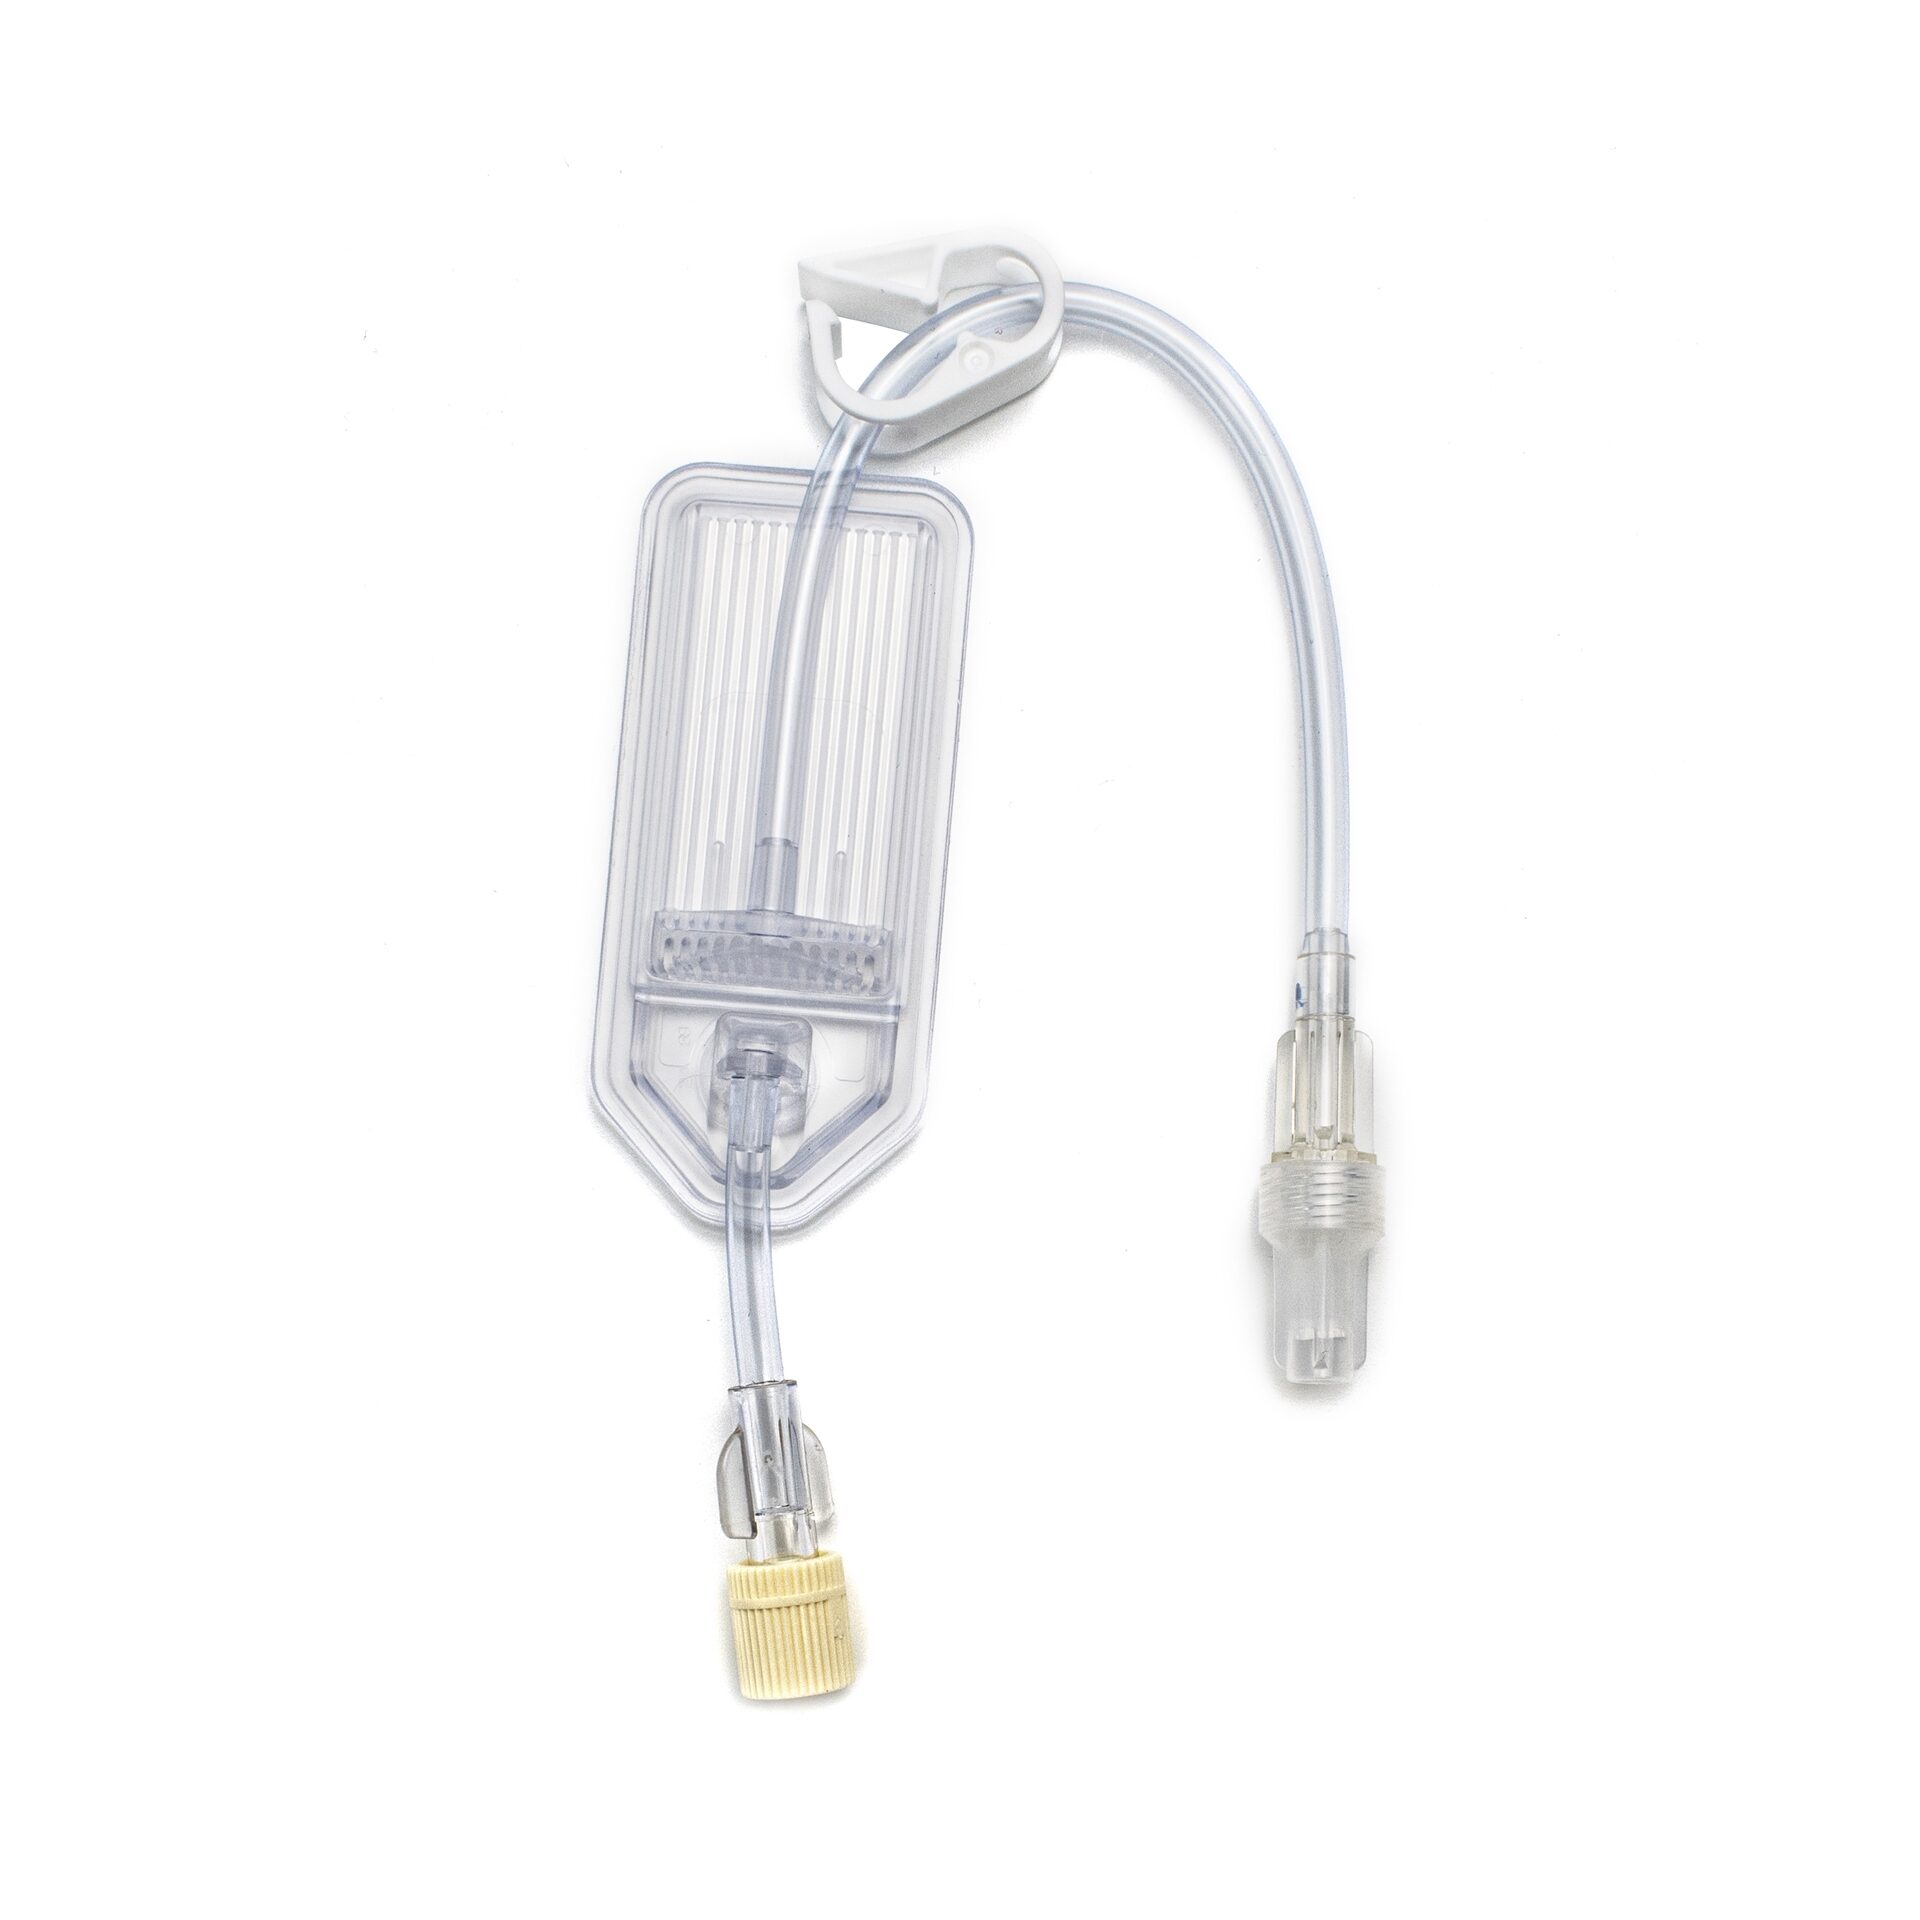 IV Extension Set, 0.2 Micron Filter, On/Off Clamp, Luer-Lock, Latex-free,  DEHP-free, 8, FlowStop Cap, Each